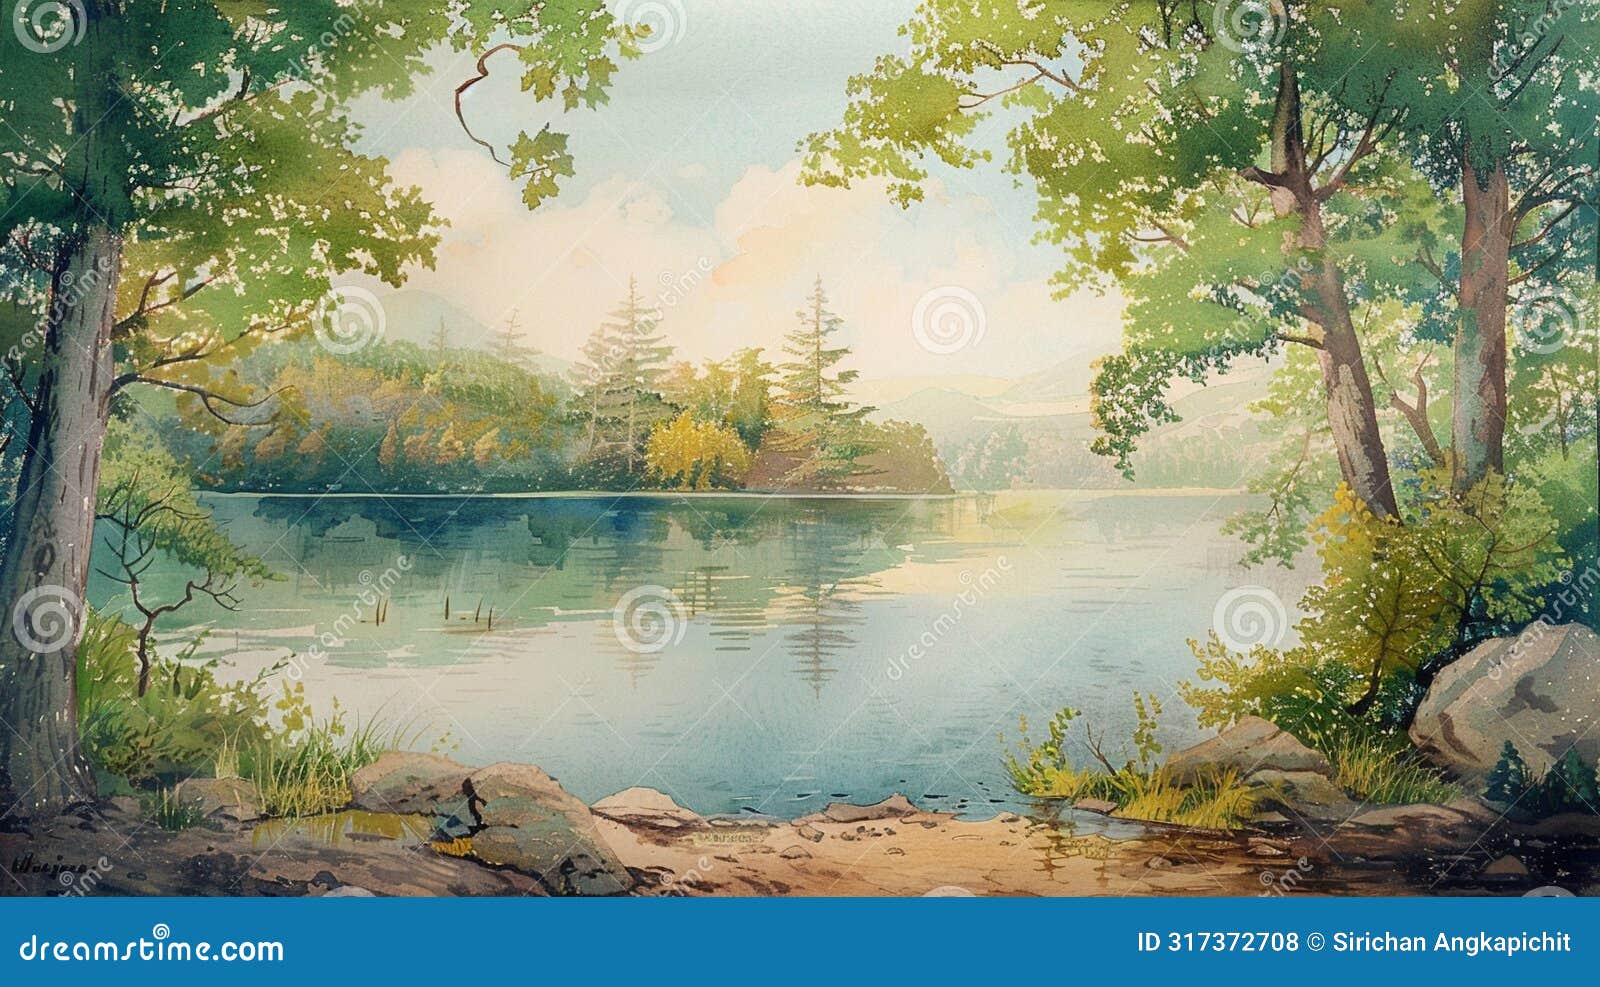 a tranquil lake scene, rendered in vertical pastel watercolors, evoking peace and stillness ai generate